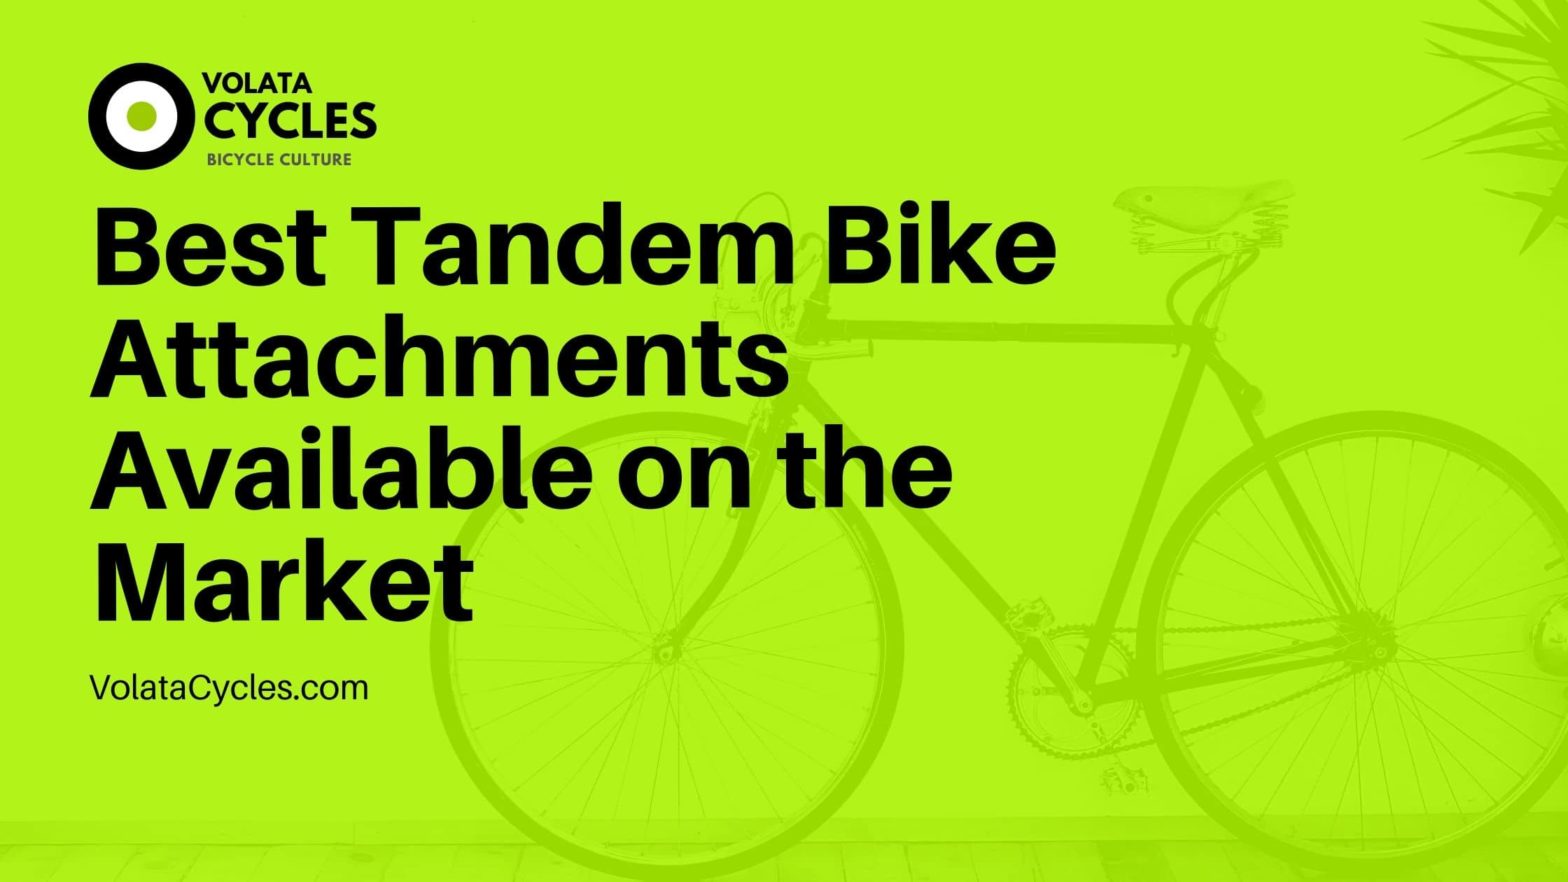 Best-Tandem-Bike-Attachments-Available-on-the-Market